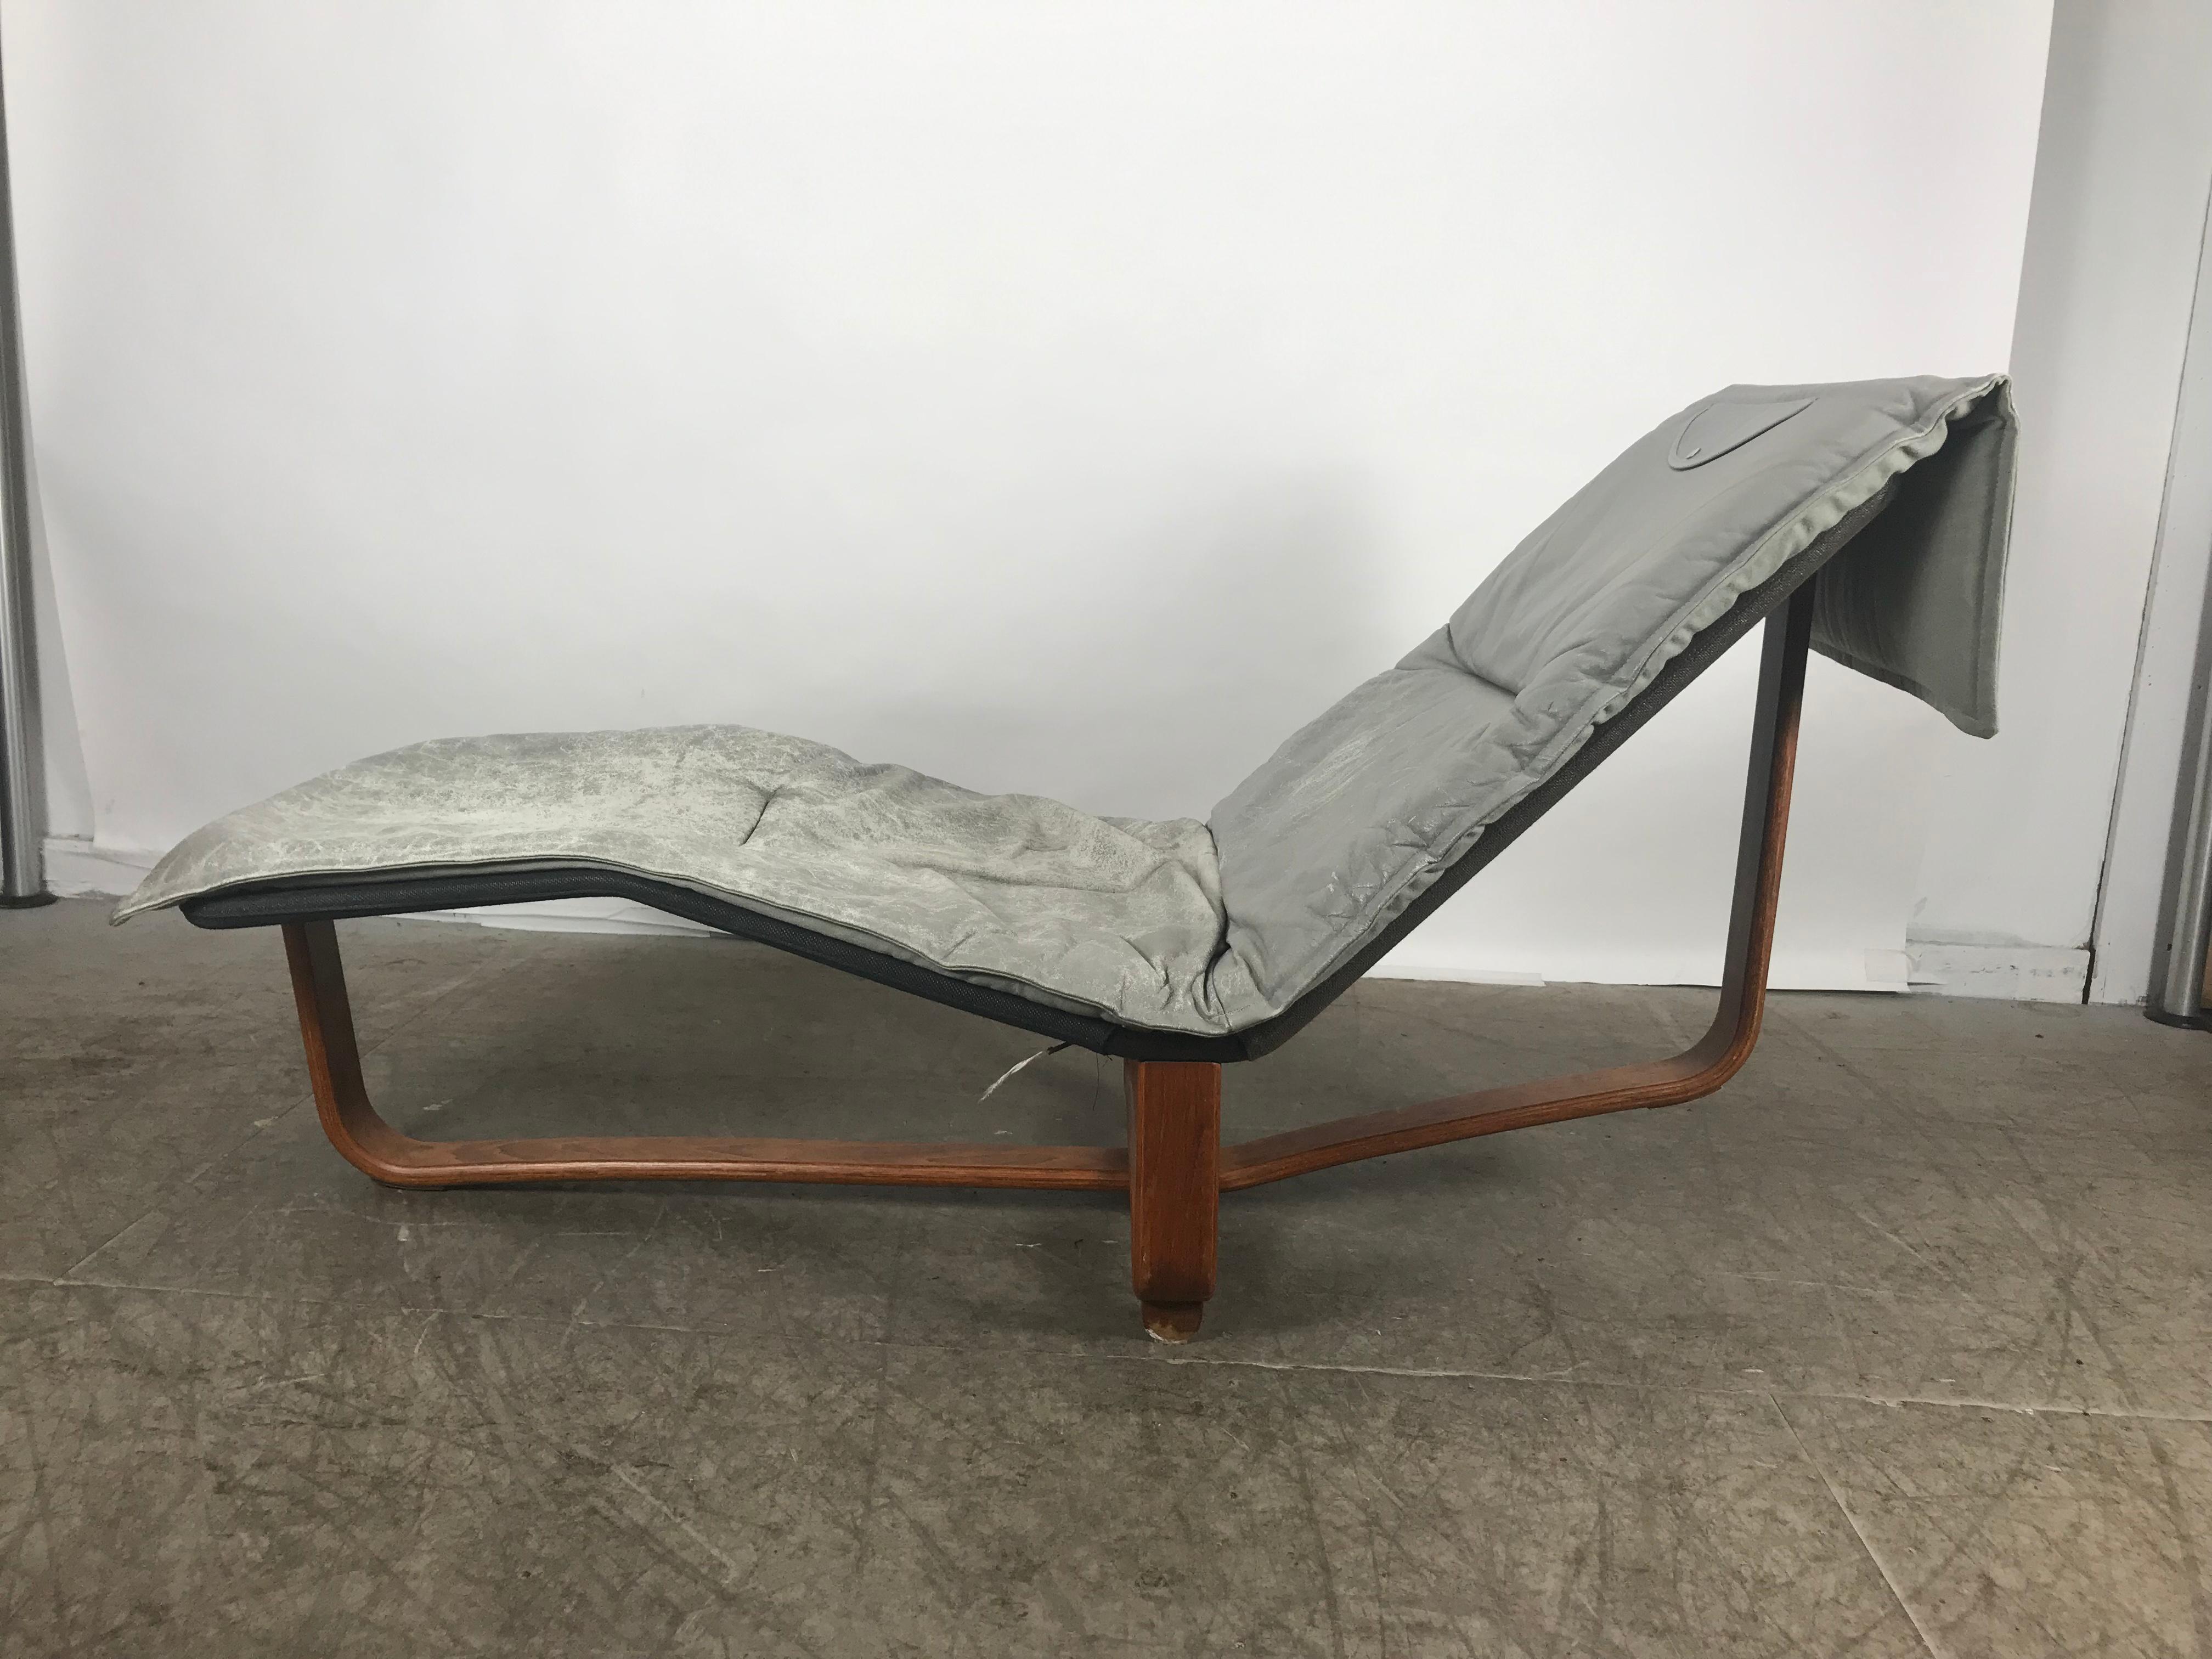 20th Century Modernist Bentwood Chaise Lounge by Ingmar & Knut Relling For Sale